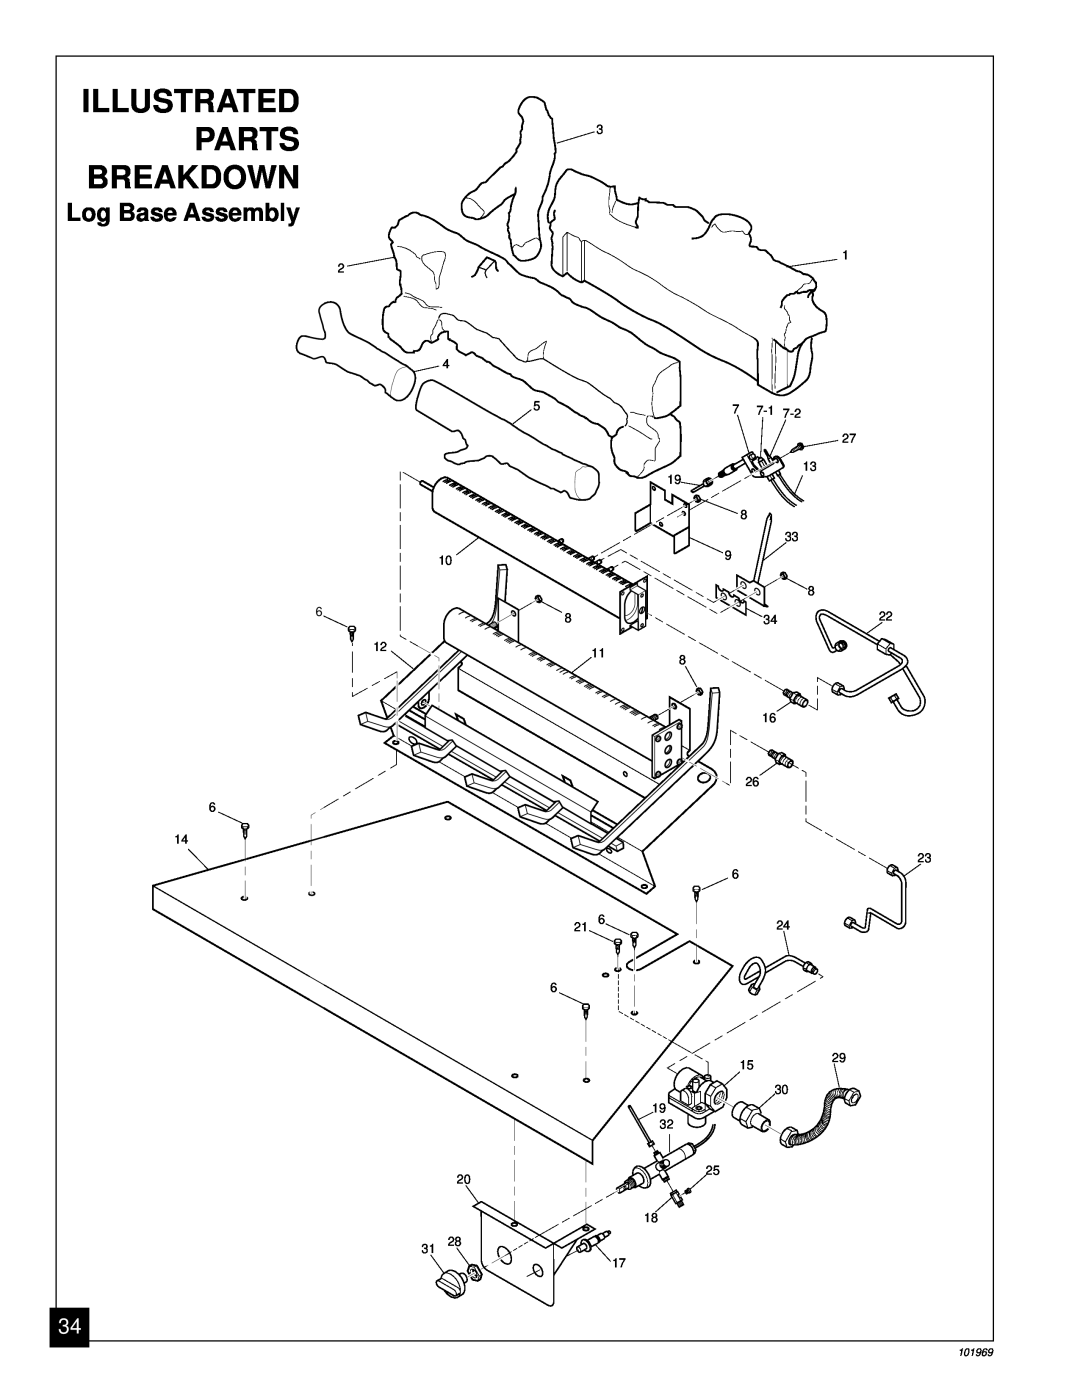 Desa UNVENTED (VENT-FREE) PROPANE GAS FIREPLACE installation manual Illustrated, Parts, Breakdown, Log Base Assembly 